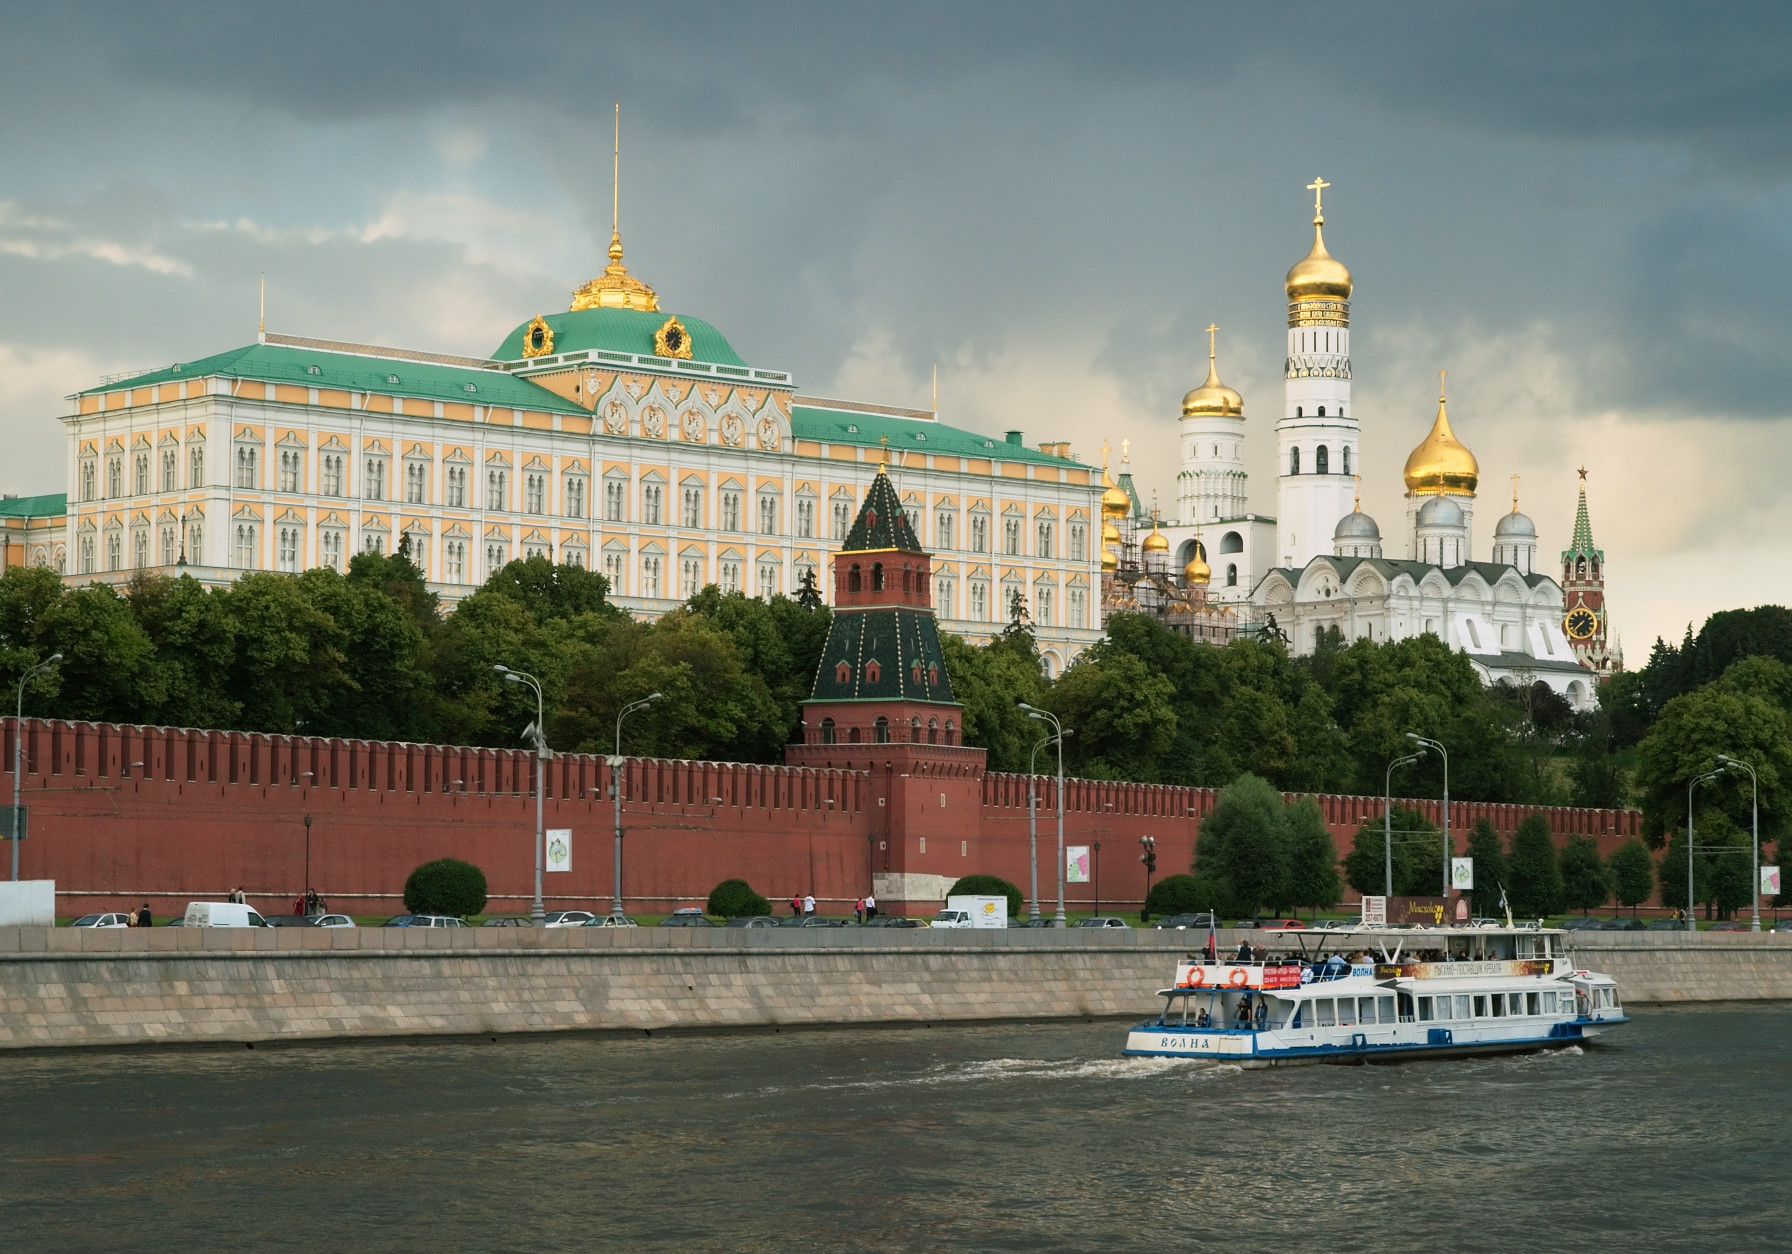 The Grand Kremlin Palace in Moscow